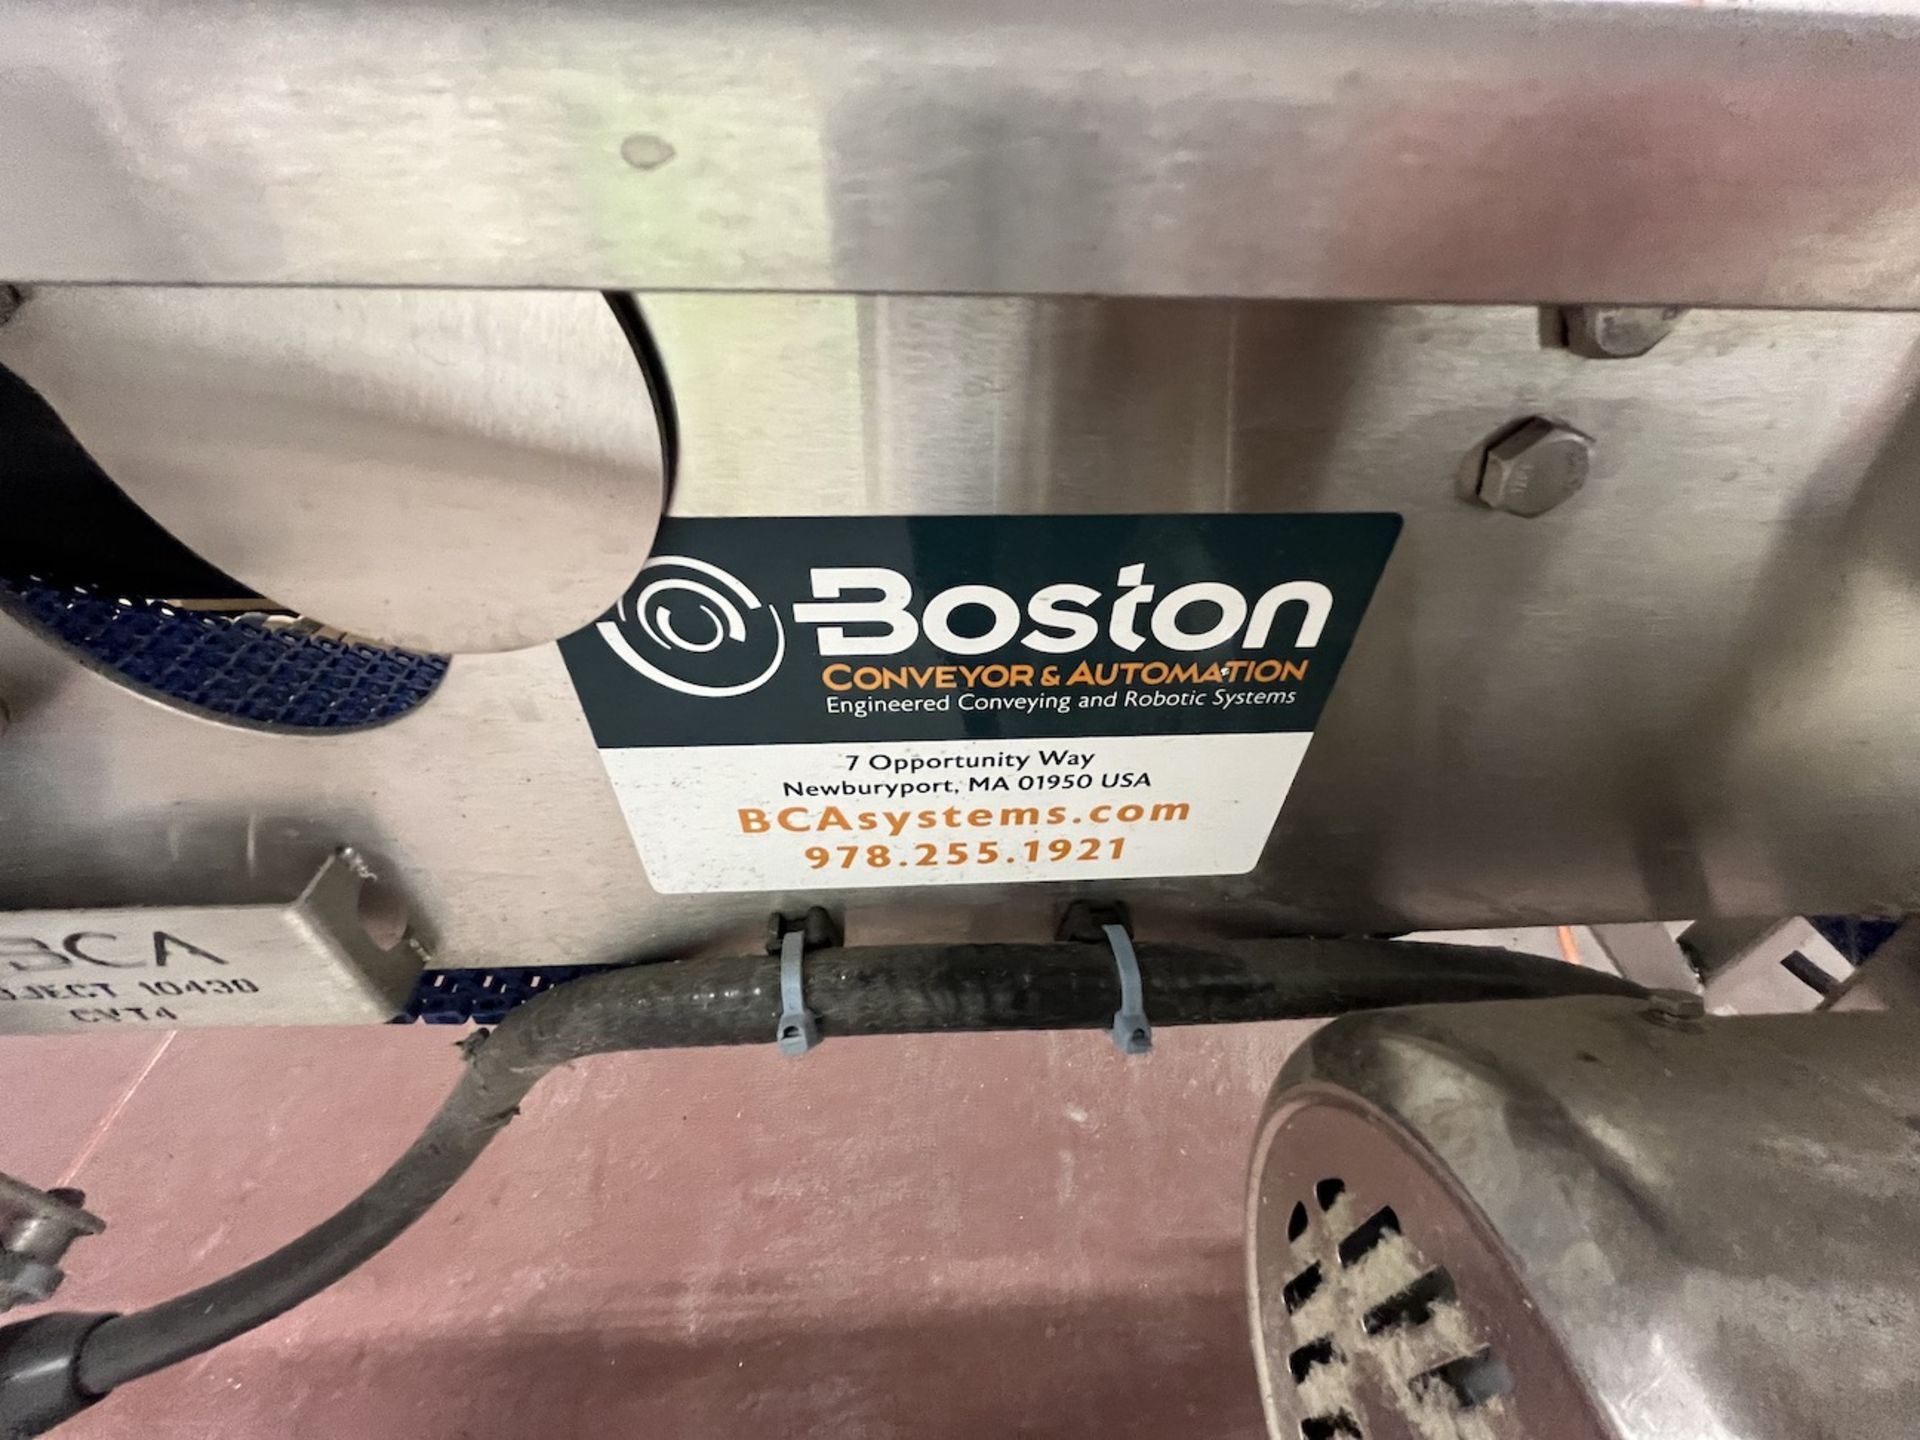 BOSTON CONVEYOR AND AUTOMATION CORP PRODUCT CONVEYOR, APPROX. 300 IN. L X 7-1/2 IN. W BELT - Image 5 of 6